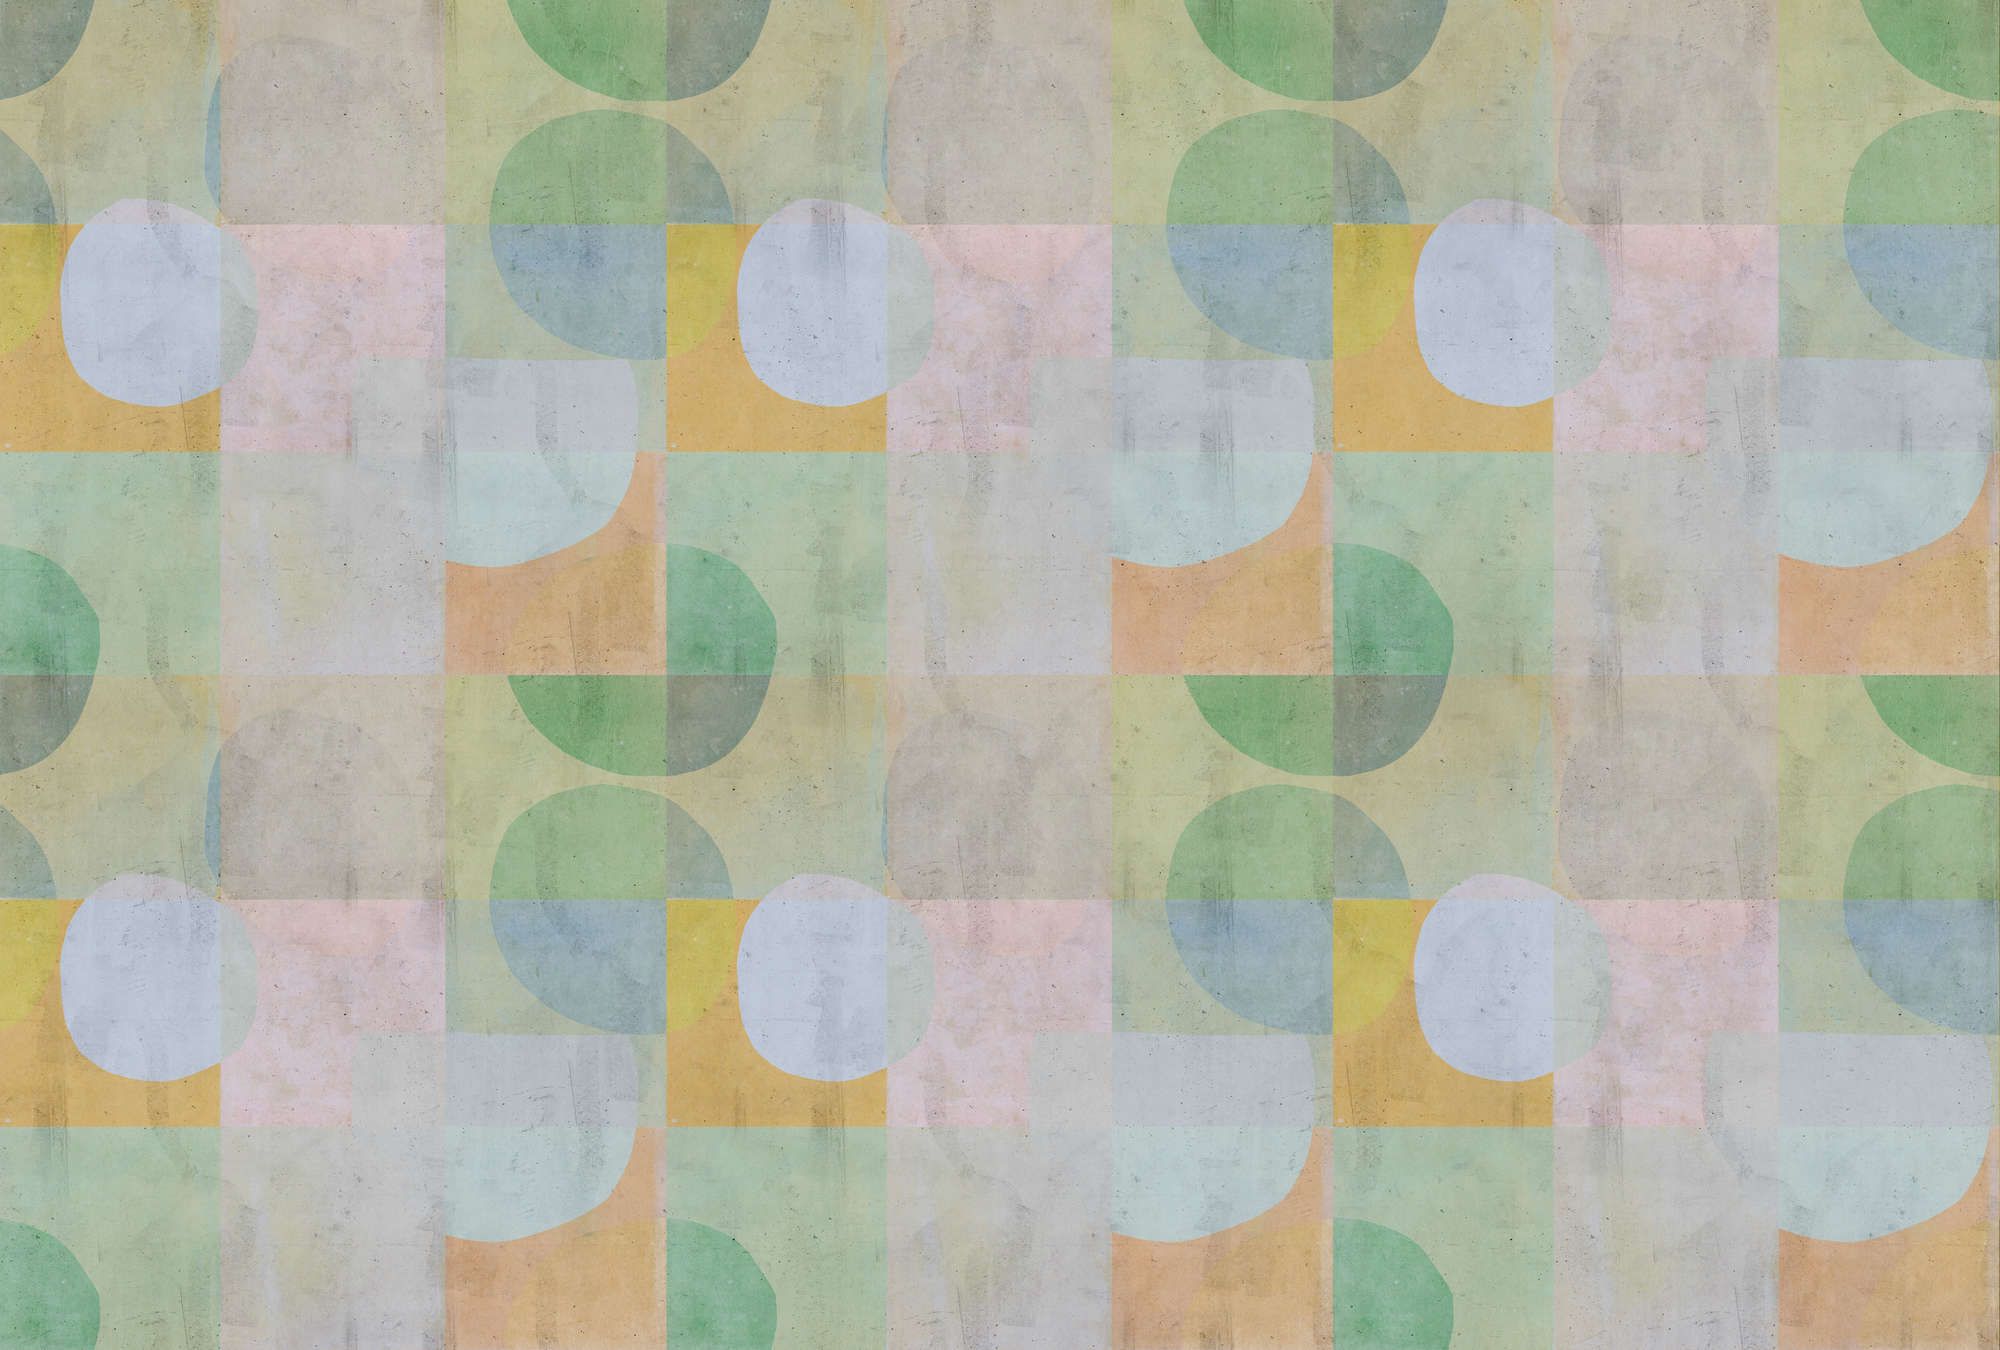             Photo wallpaper »elija 1« - retro pattern in pale colours with concrete look - green, blue, pink | matt, smooth non-woven
        